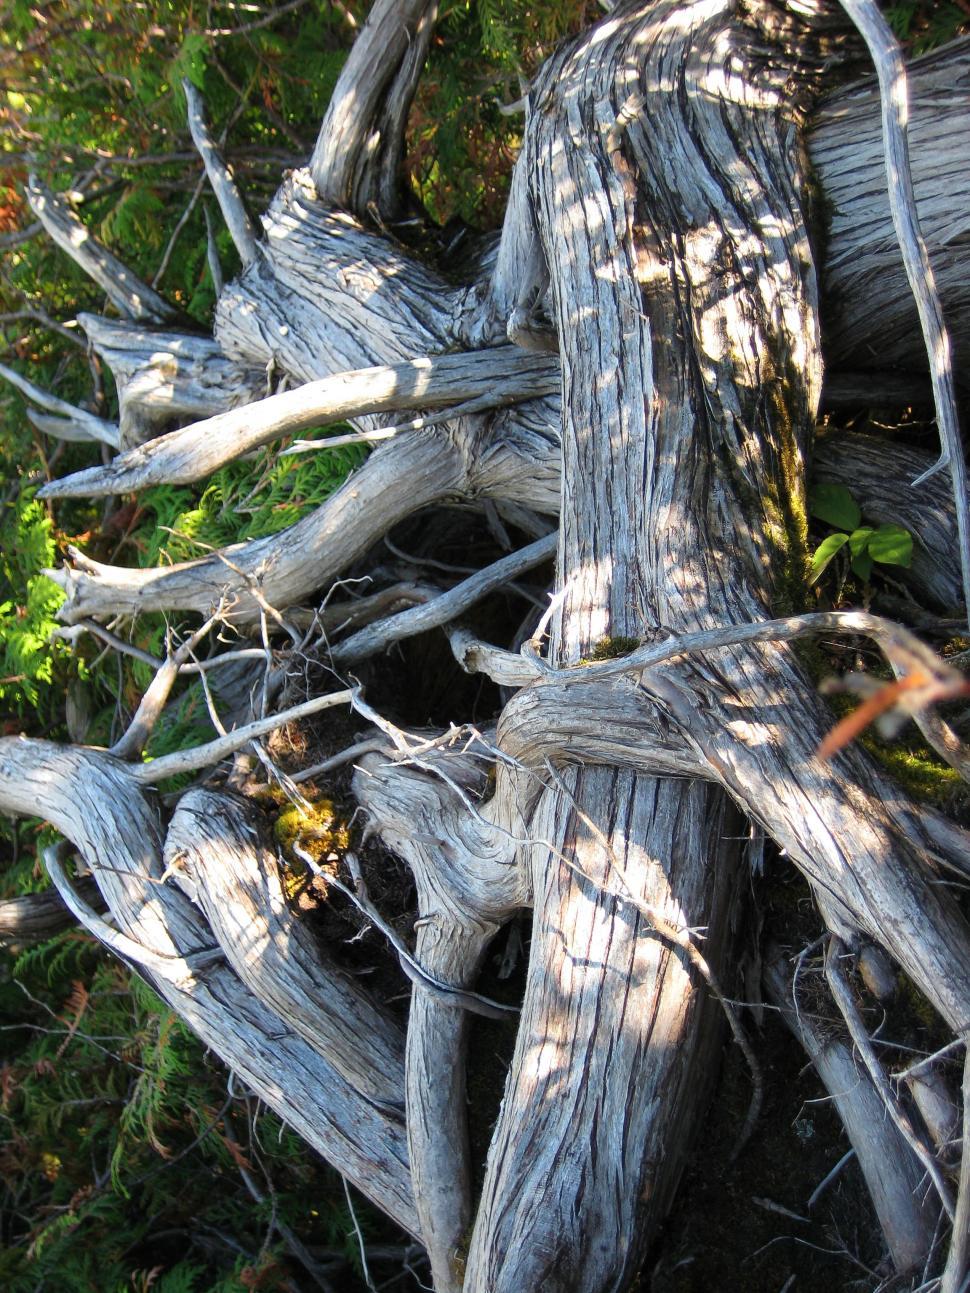 Free Image of Piles of Cut Tree Branches 